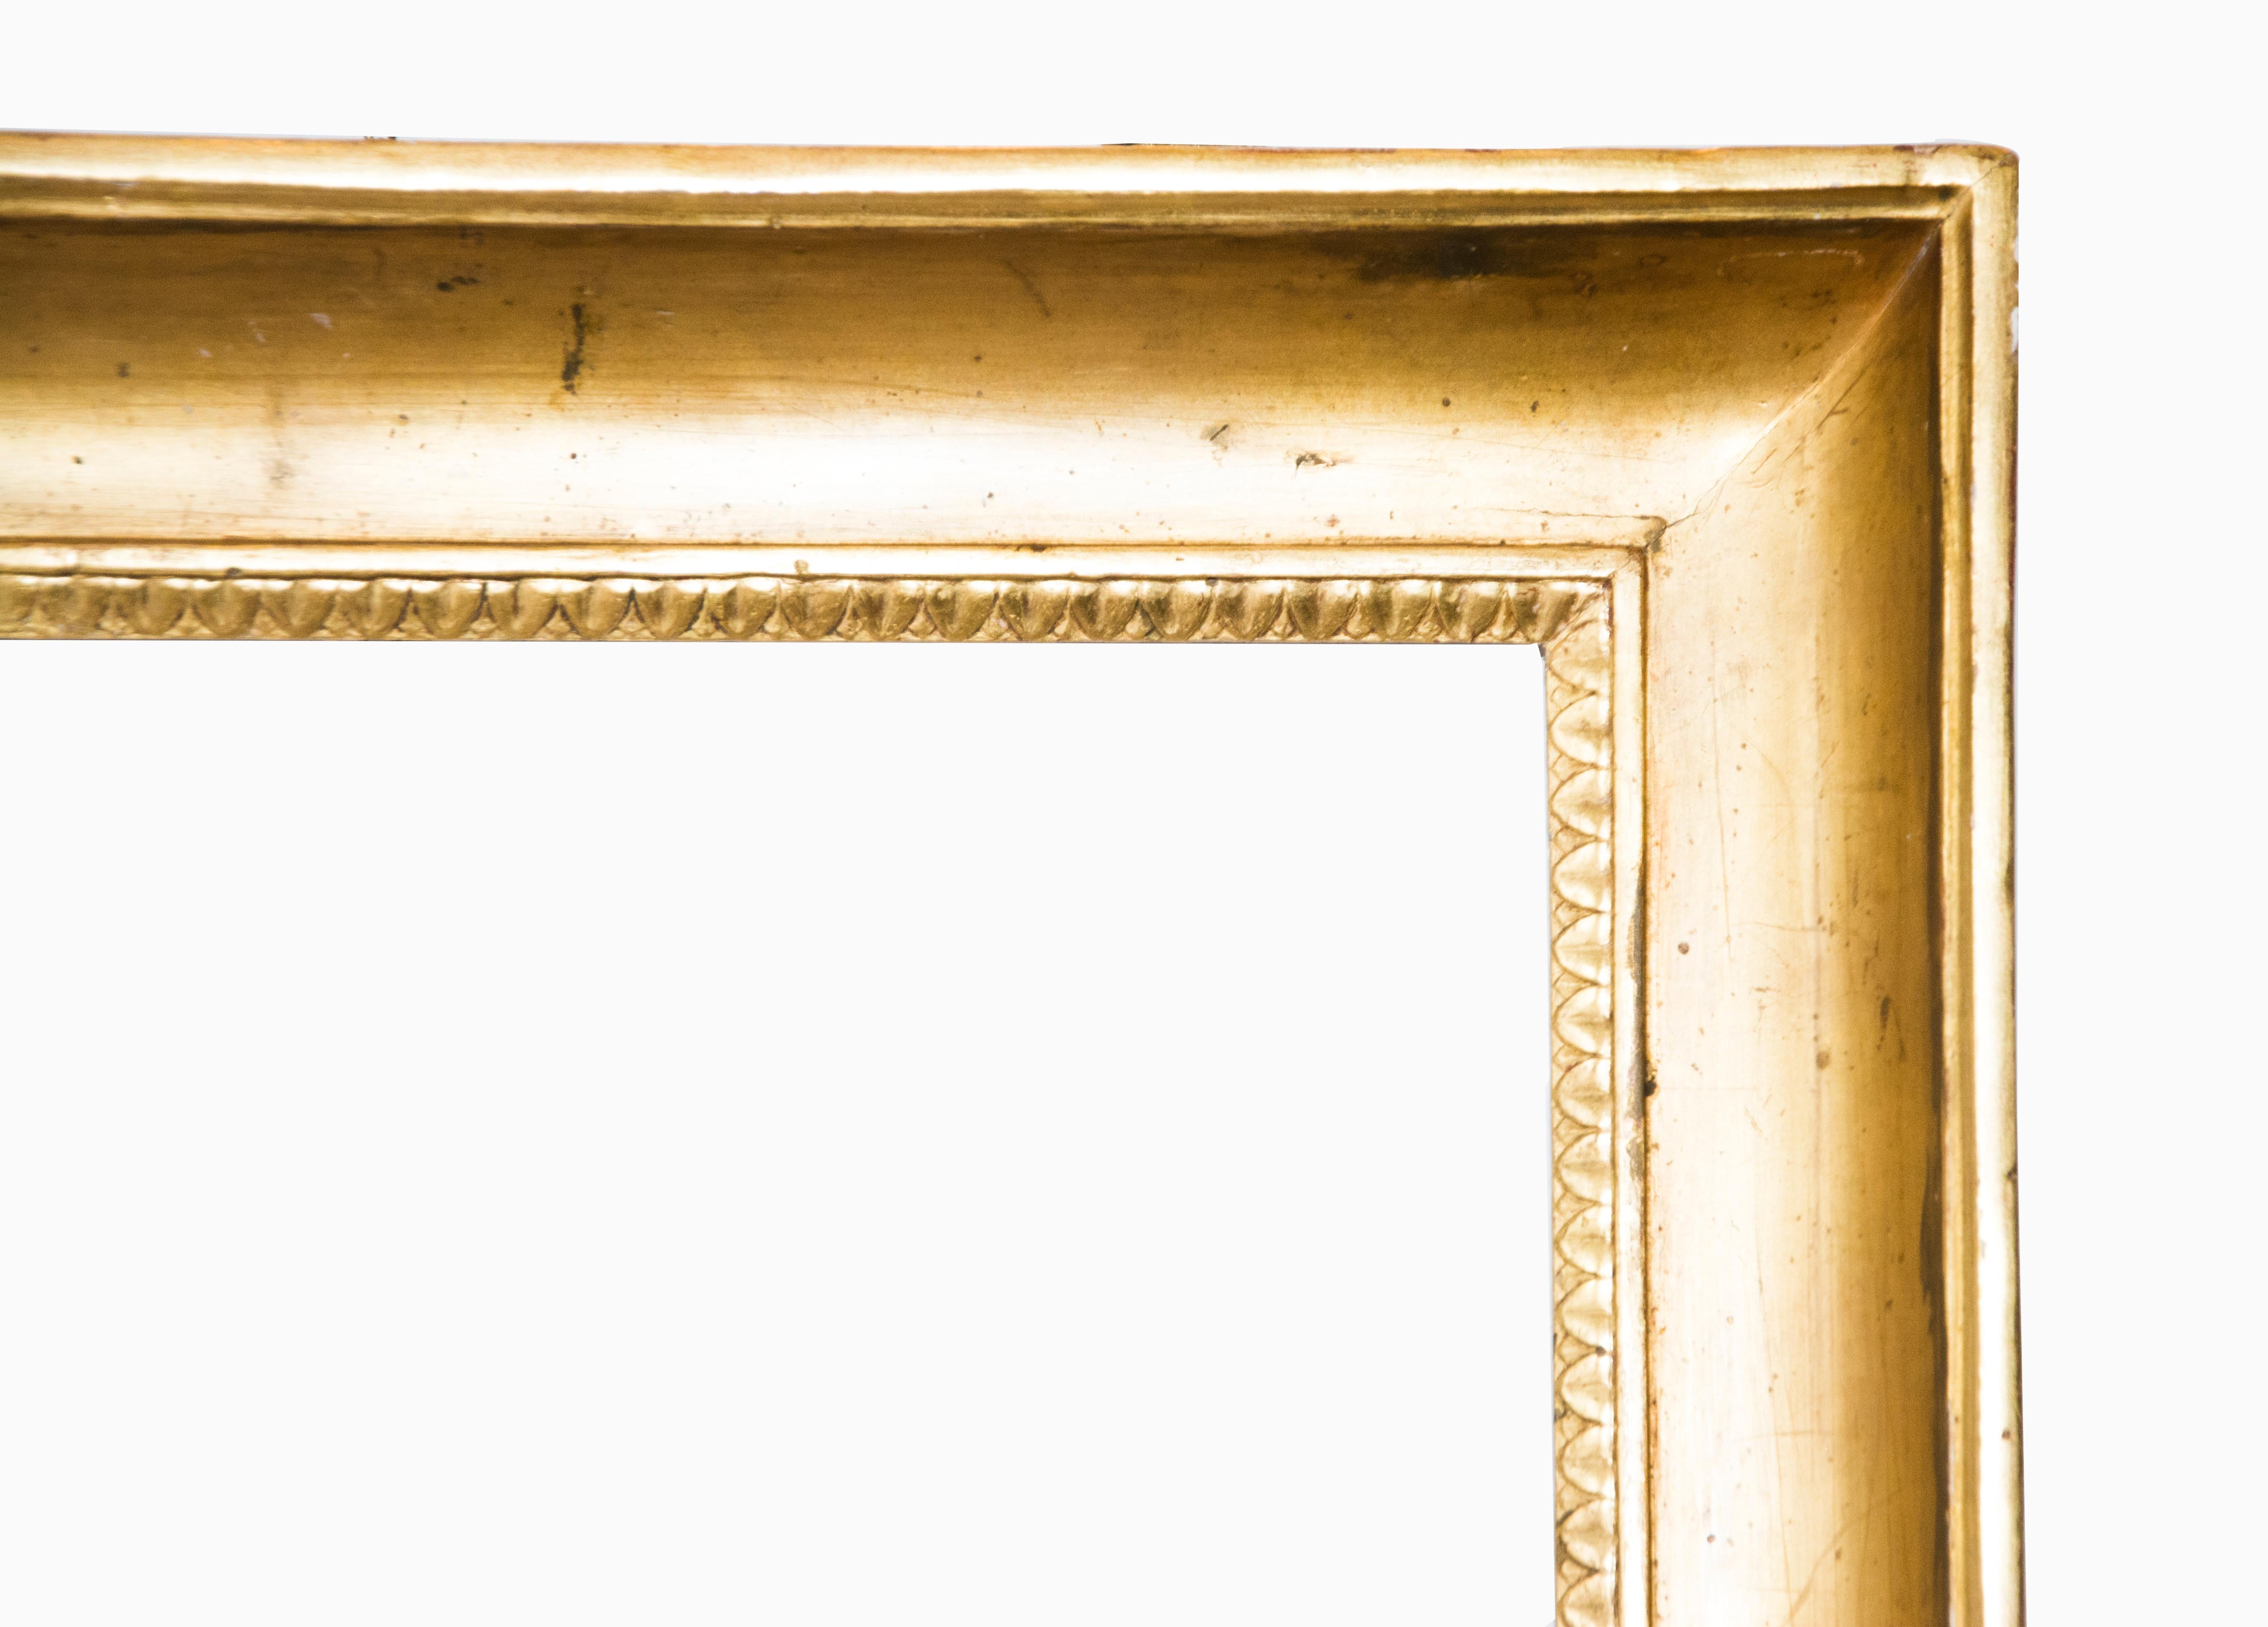 Naples frame, end of the 18th century.

Sculpted and gilded shell-shape frame decorated with ribbed leaves and leaflets.

Measures: Inside: 64.3 x 51.2 cm; outside: 77 x 63.7;
Depth is the wide of the band.